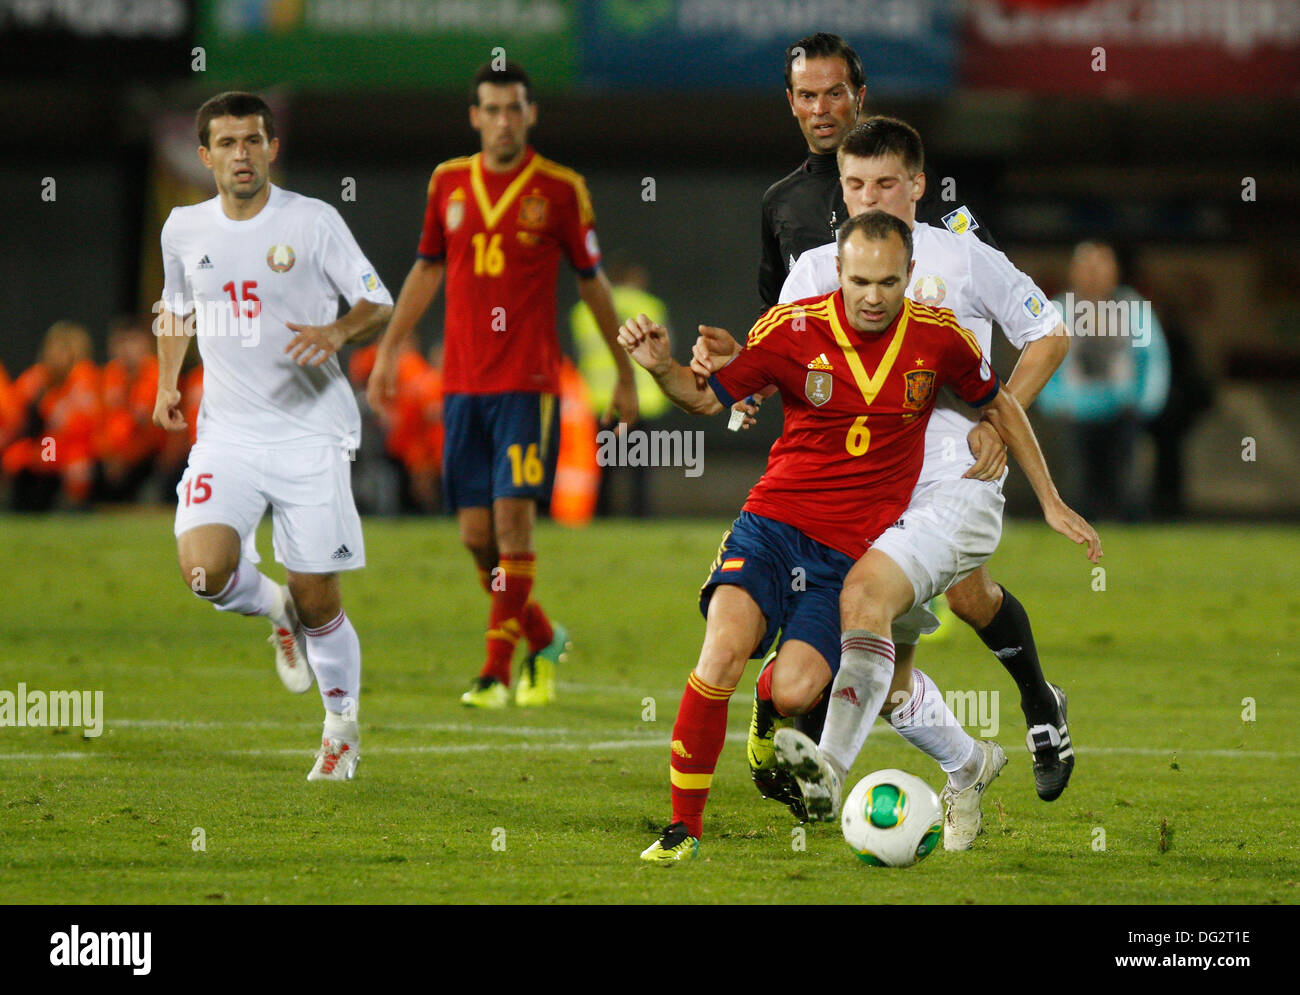 Palma de Mallorca, Spain, 12th Oct 2013, Spain«s soccer national team Iniesta controls the ball during their 2014 World Cup qualifying soccer match against Belarus at Son Moix stadium in Palma de Mallorca on friday 11th October. Zixia/Alamy Live News. Stock Photo